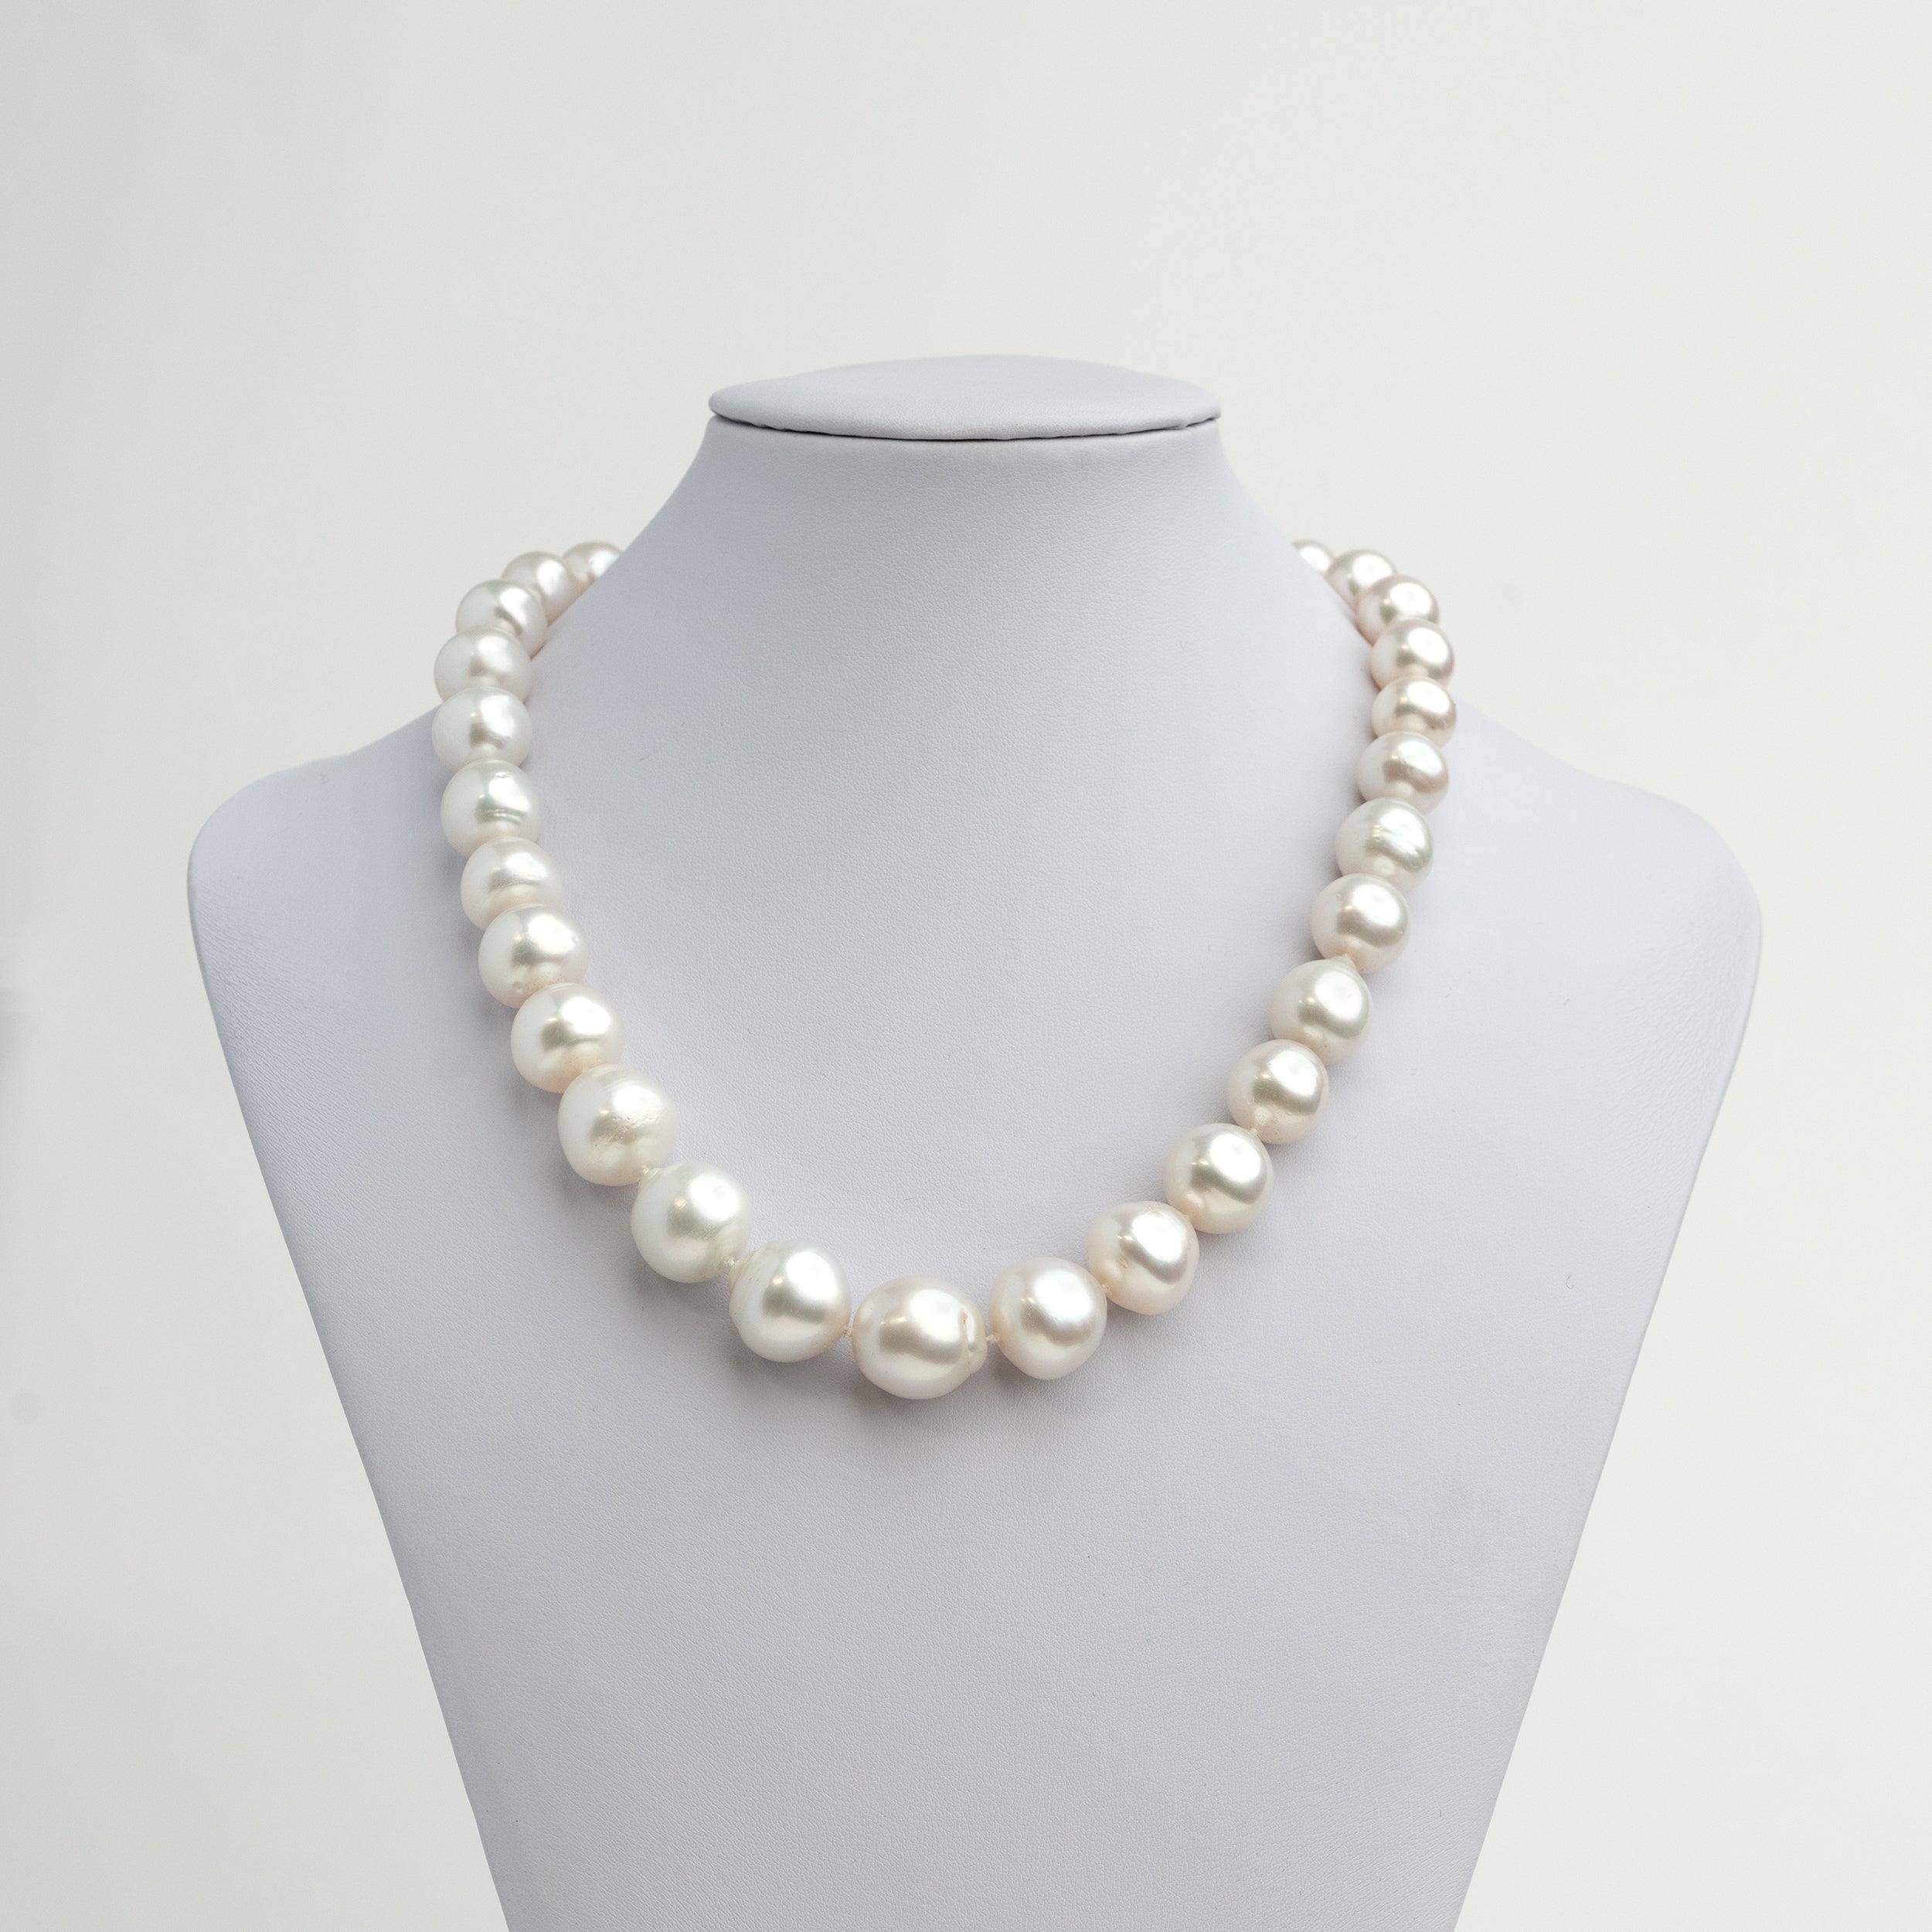 Large 10 - 16.5mm AAA Australian Cultured Pearl Necklace | 45cm